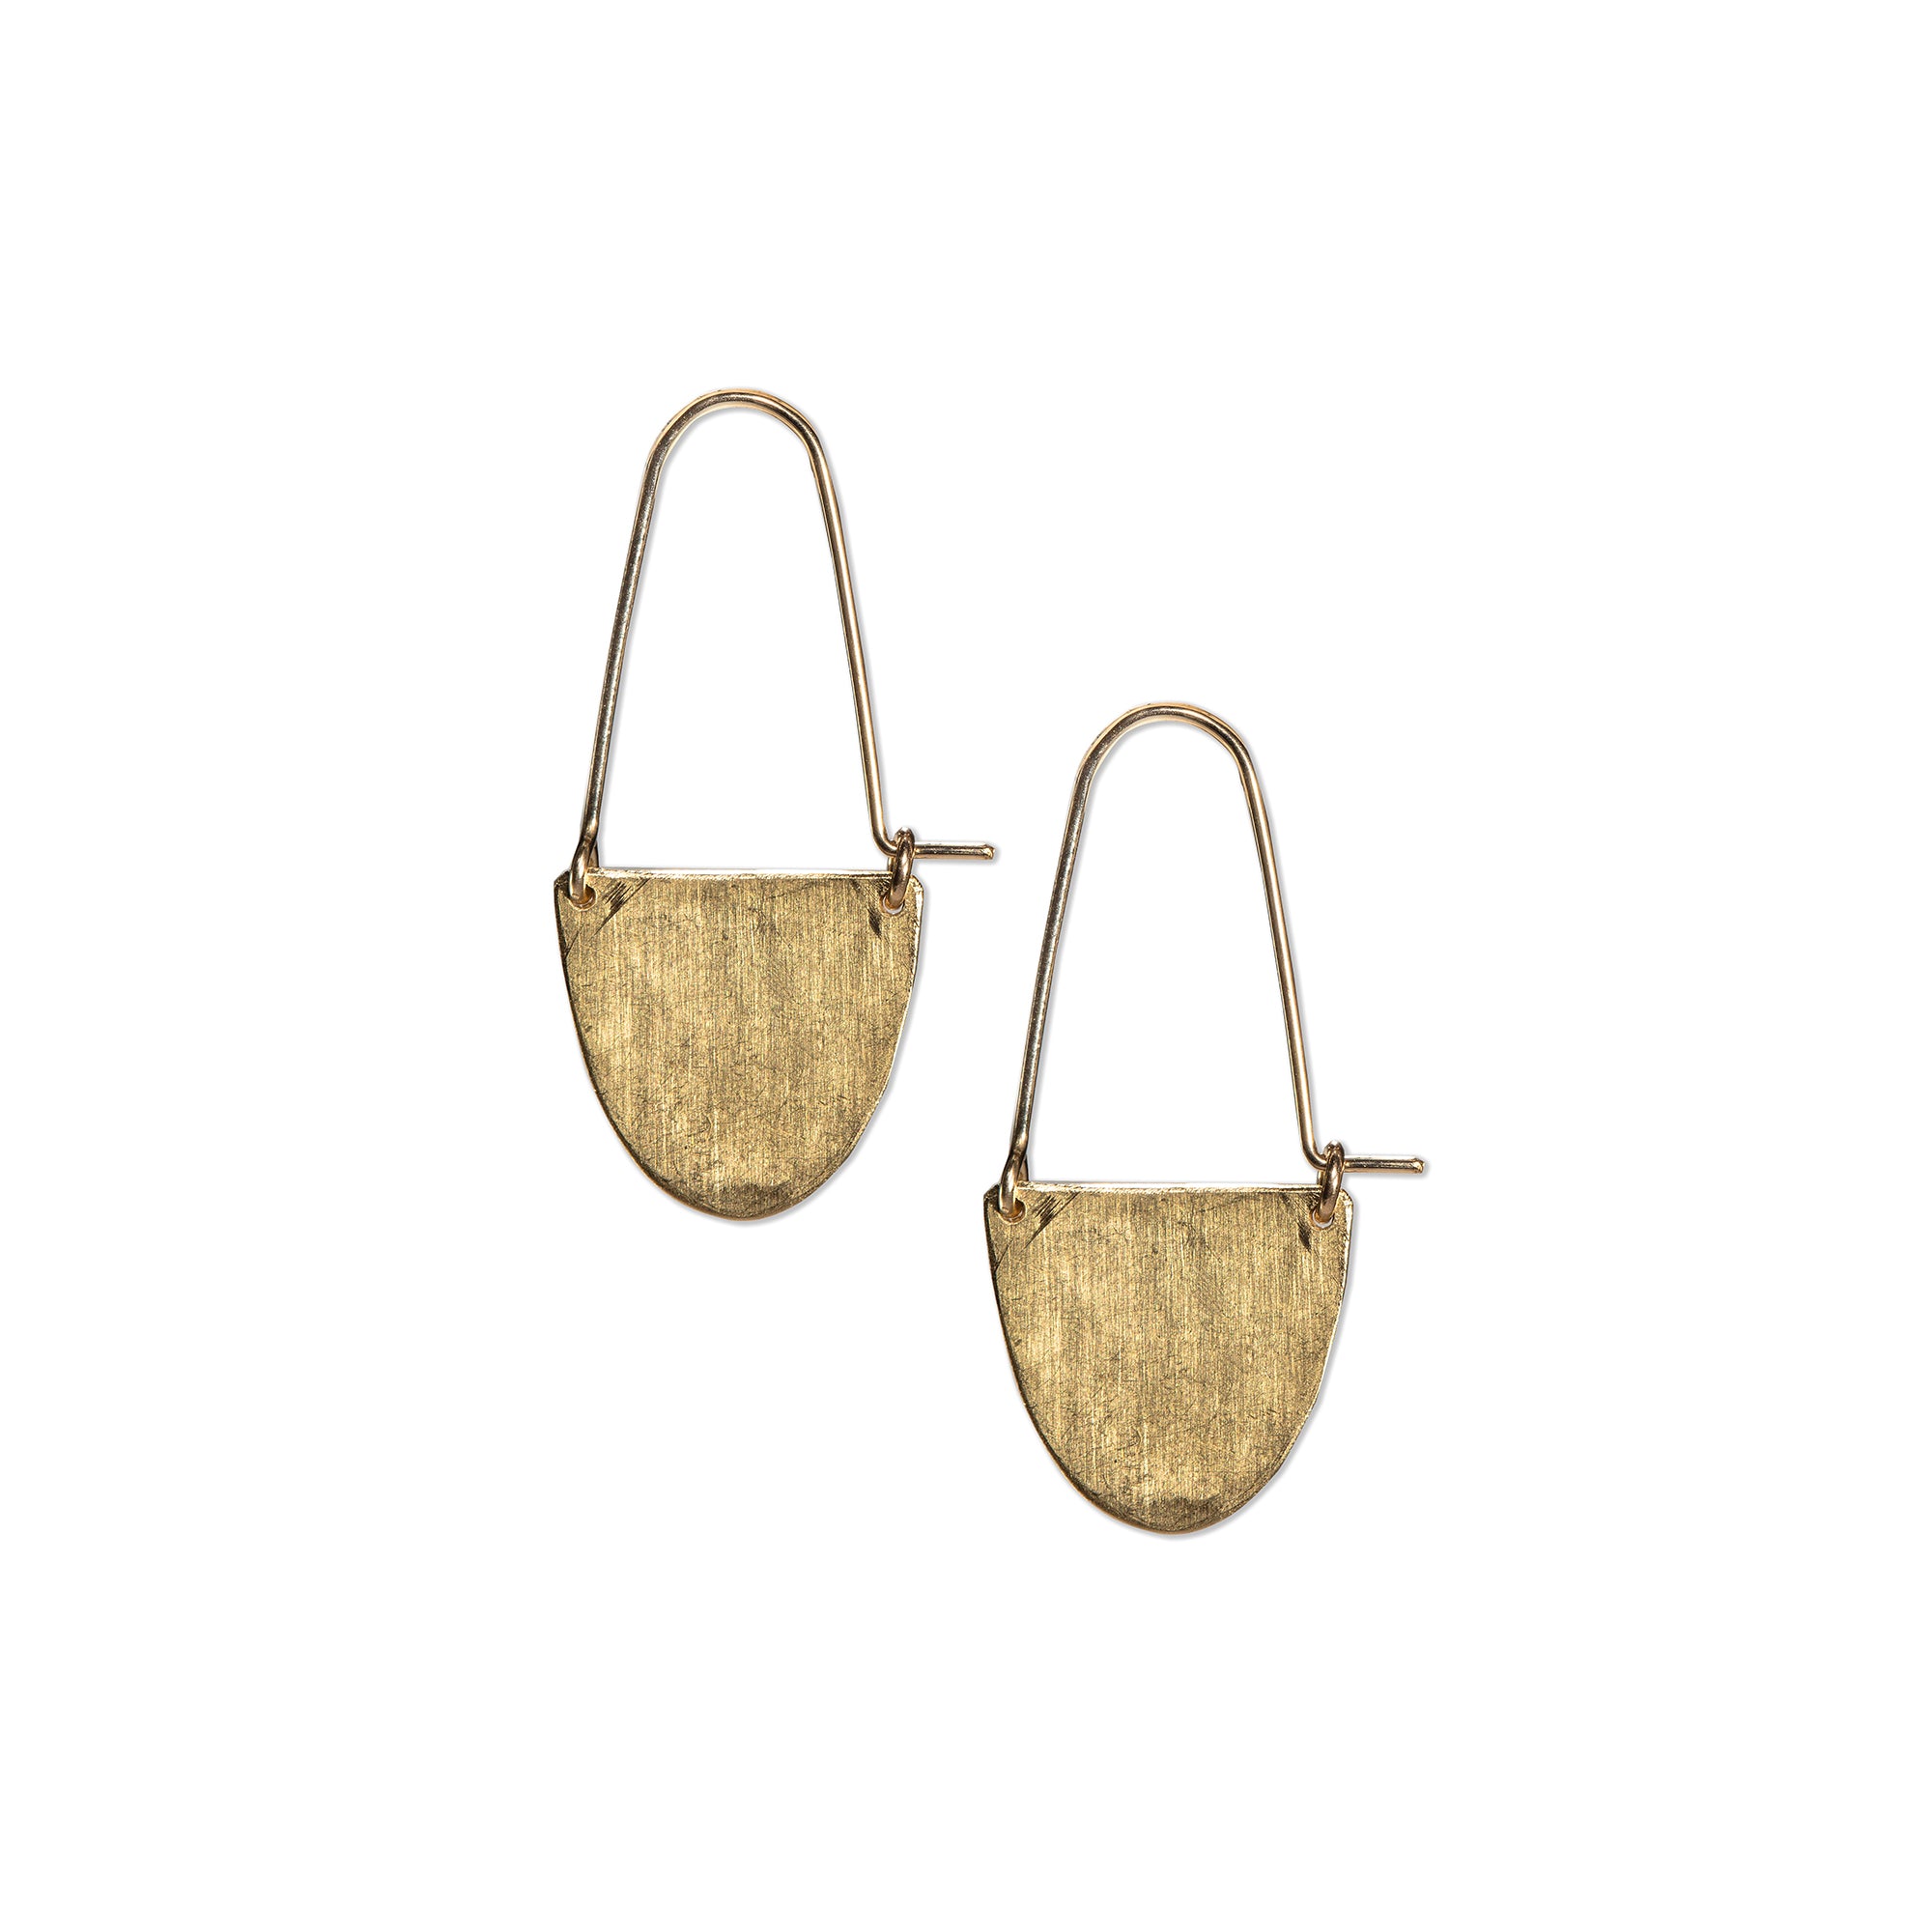 The Half Moon Hoop Earrings feature a hammered brass semi-circle that suspends delicately from 14K gold-fill wires